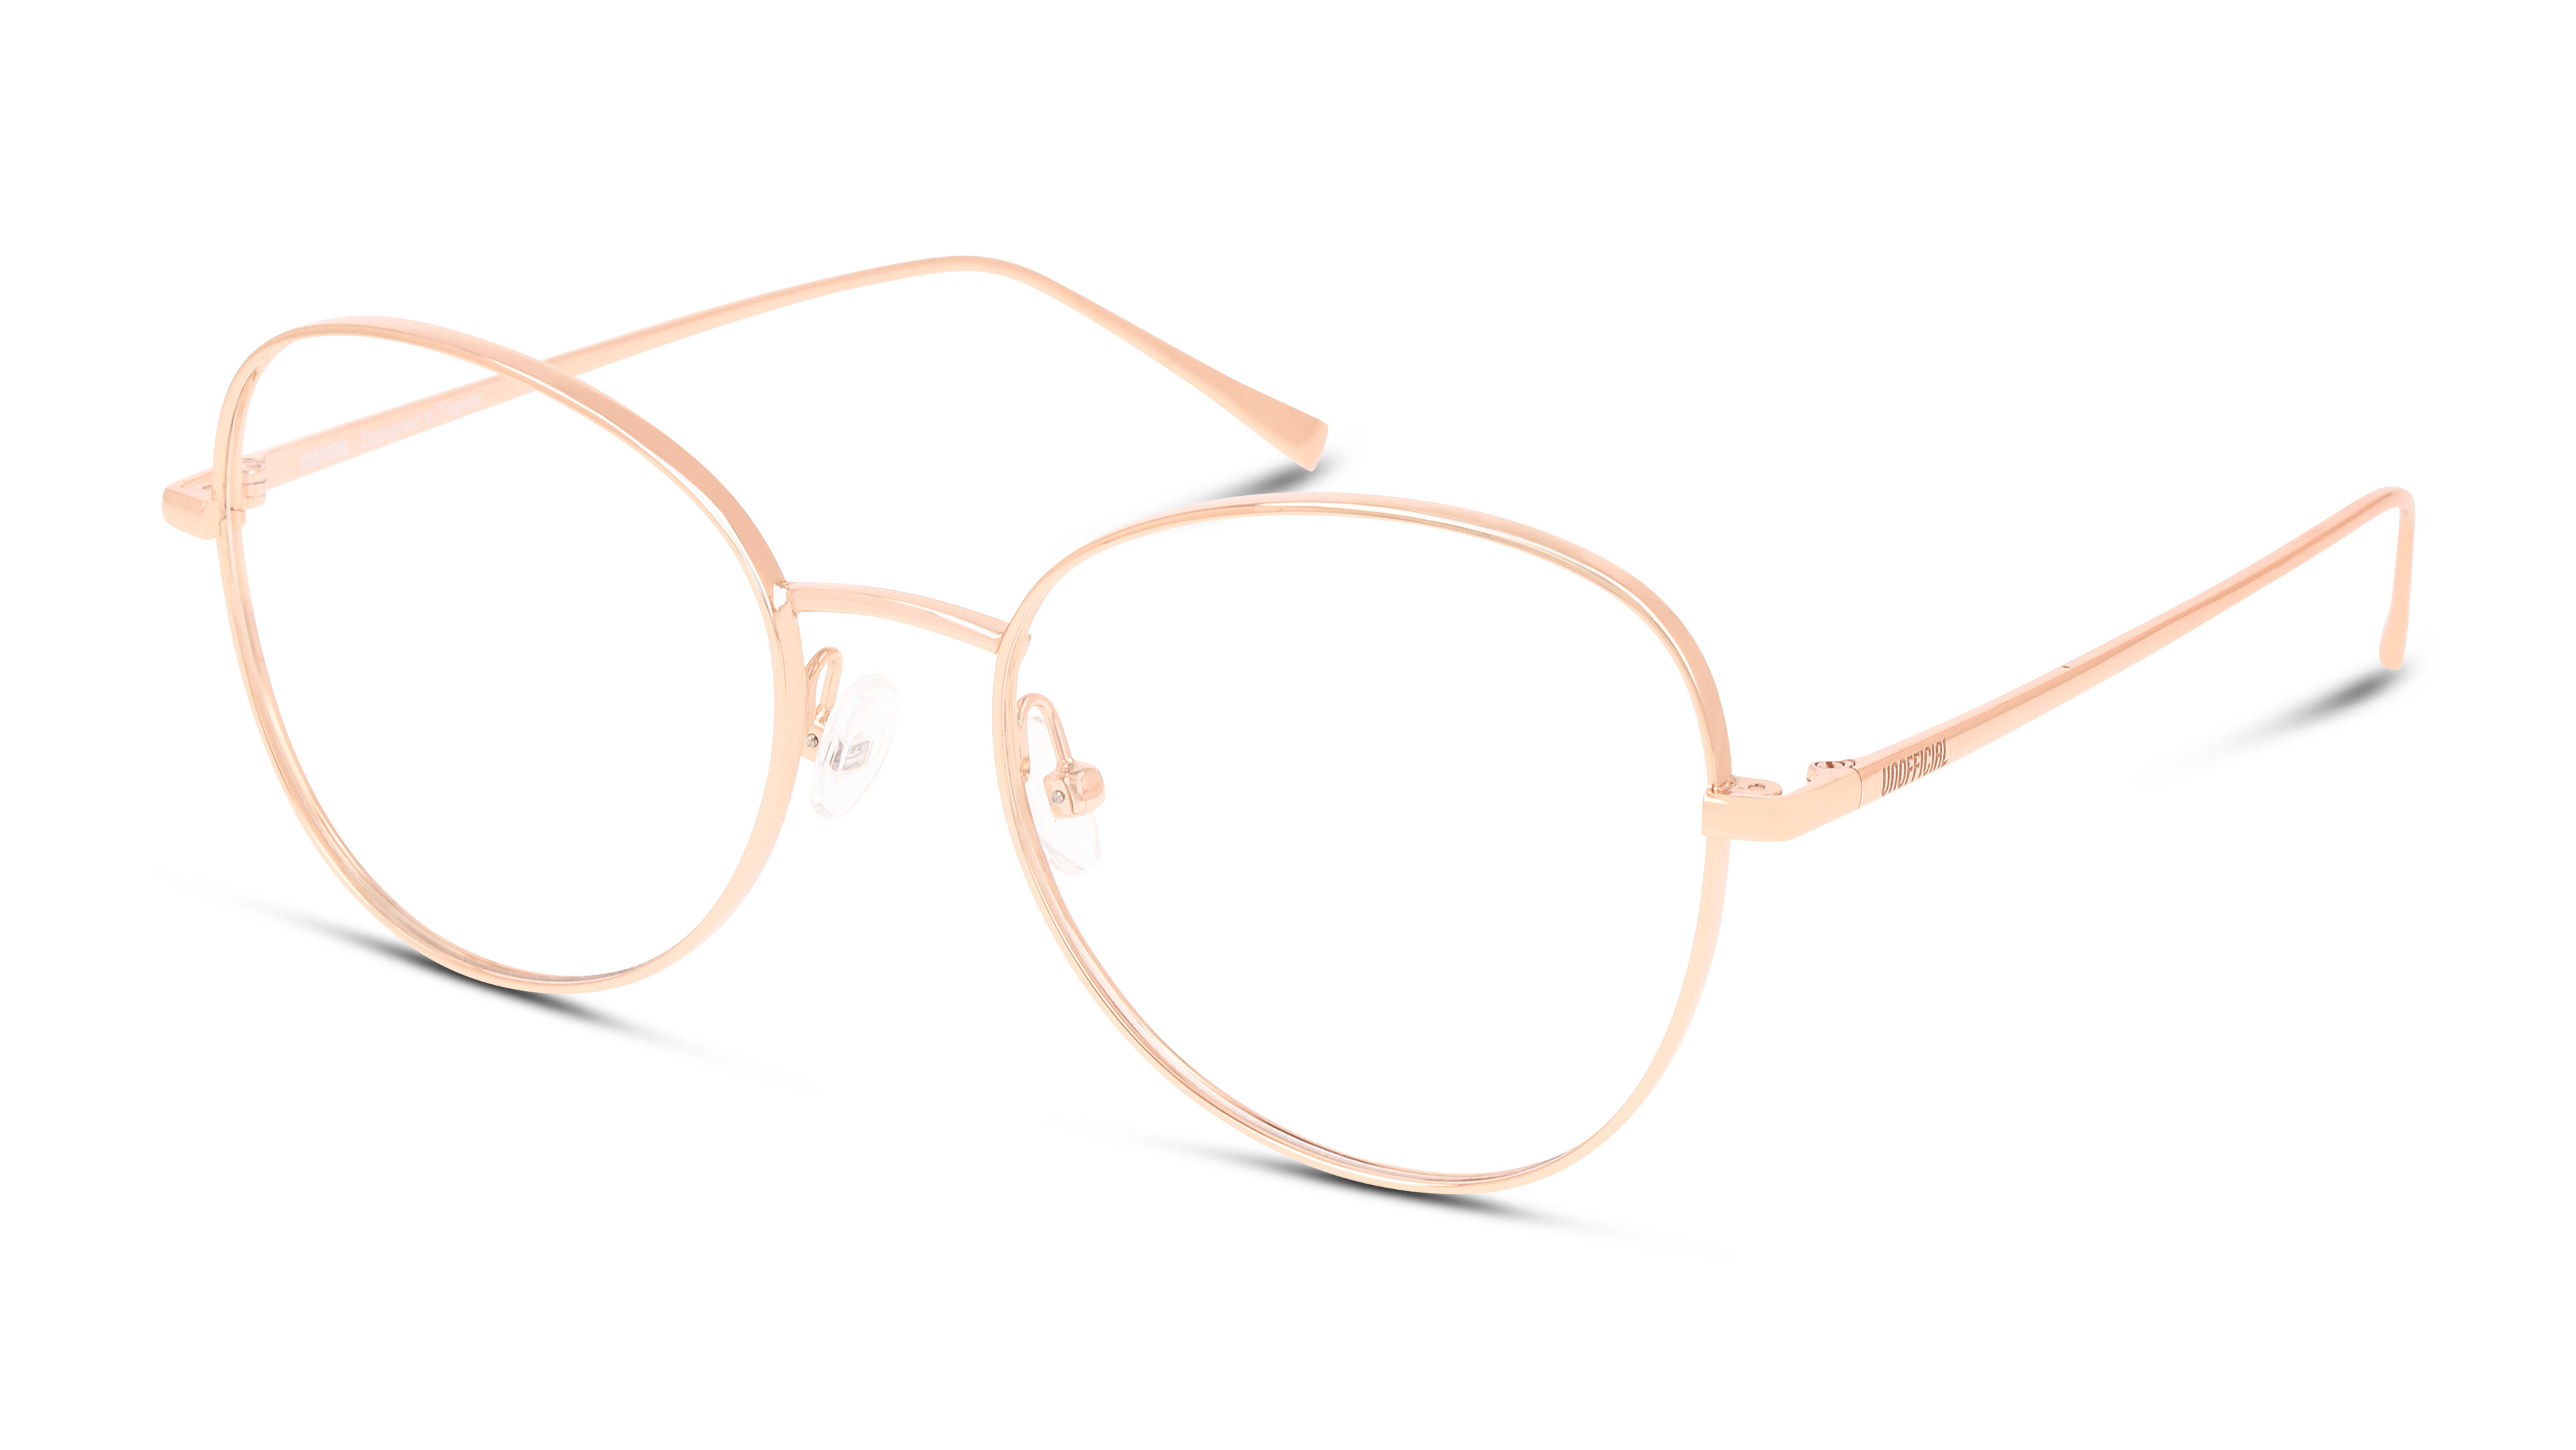 Angle_Left01 UNOFFICIAL UNOF0293 PP00 Brille Rosa, Goldfarben